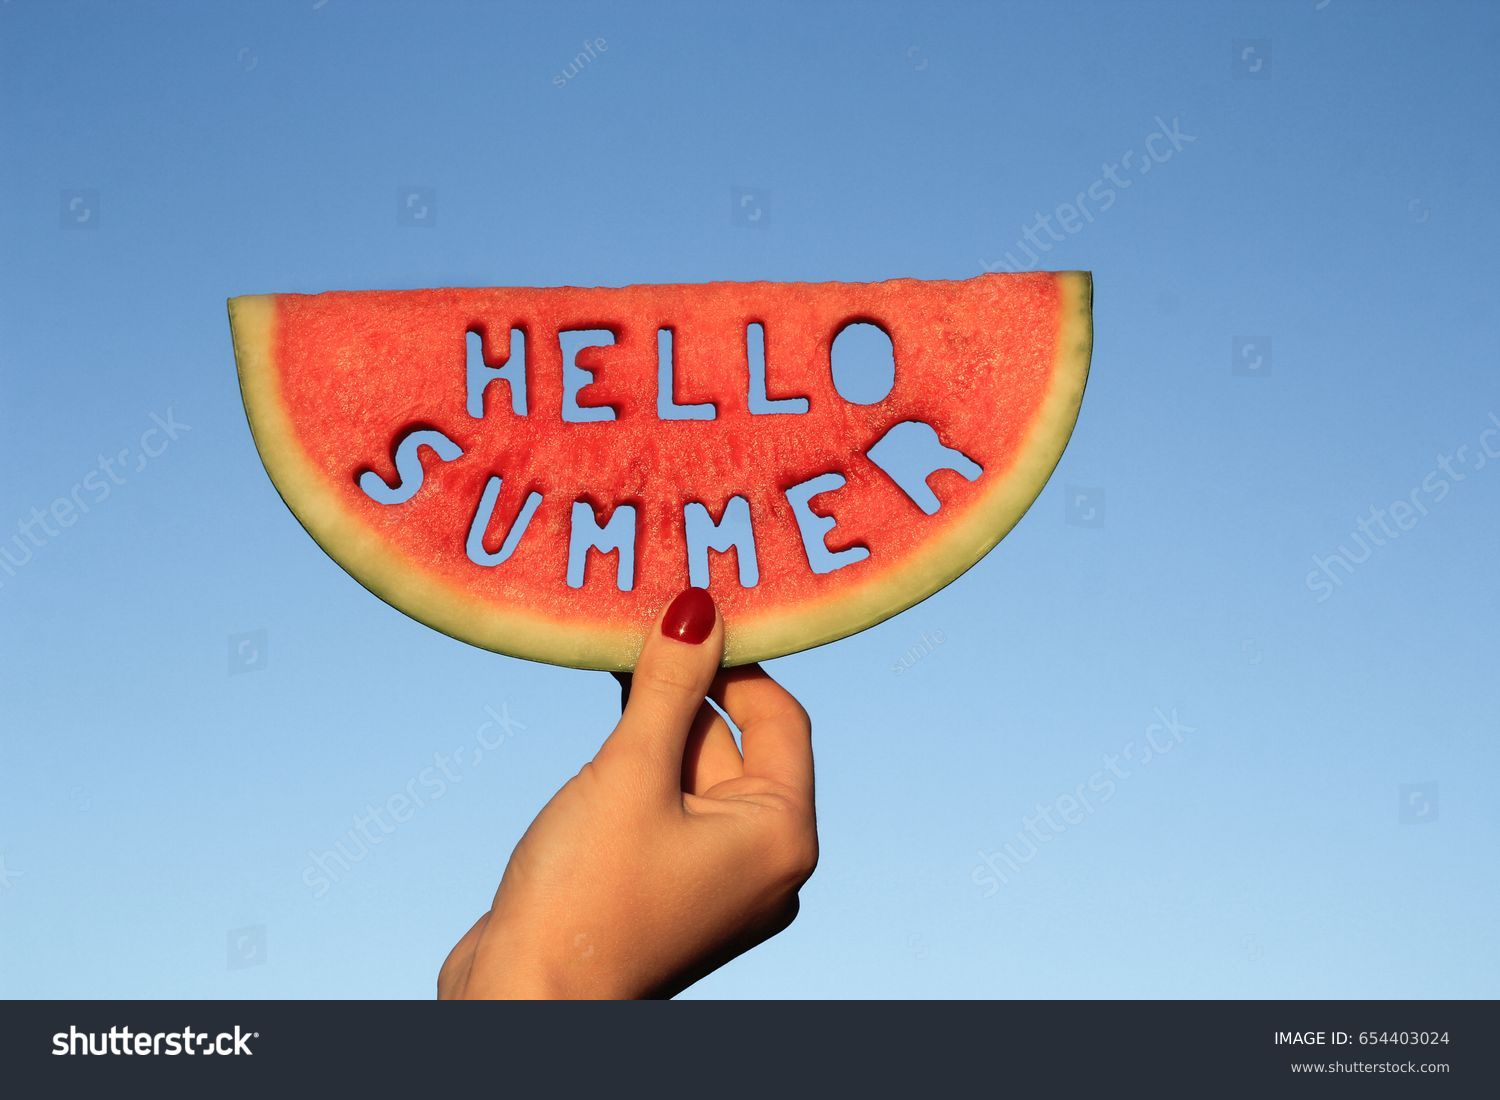 Watermelon slice  with text Hello Summer,  woman hands holding it against blue sky. Summertime concept. #654403024